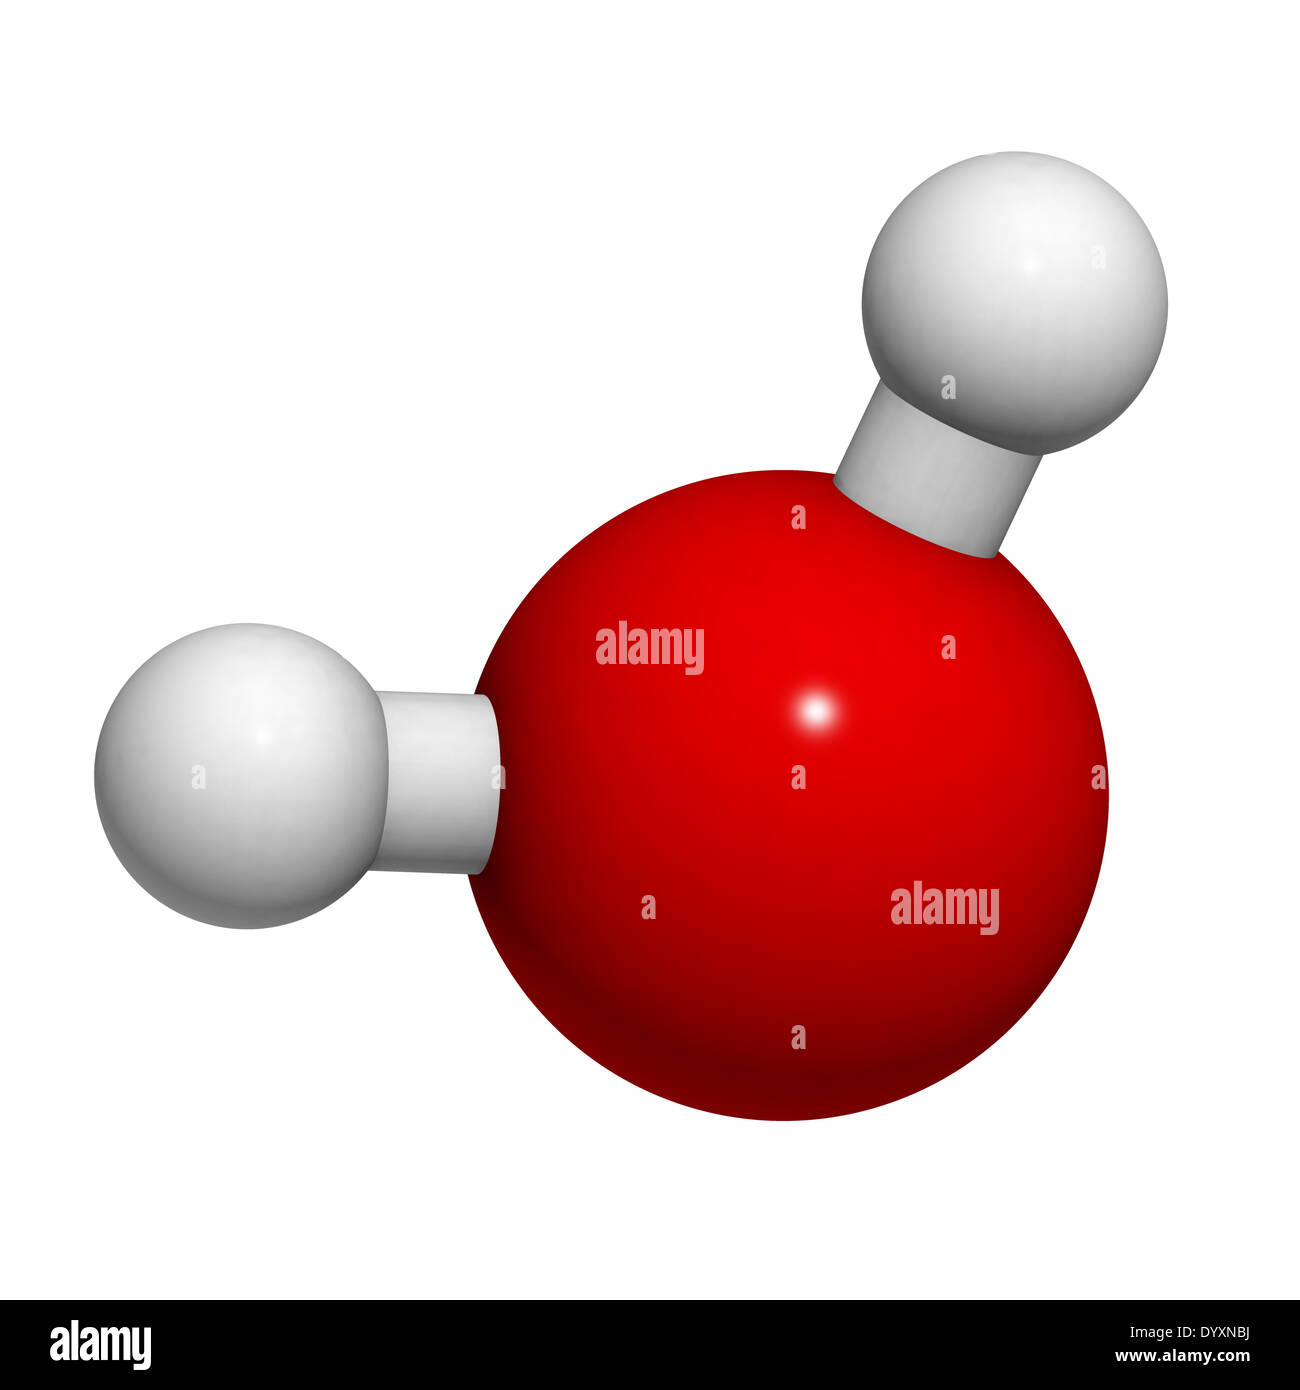 Water molecule, chemical structure. Atoms are represented as blue ...